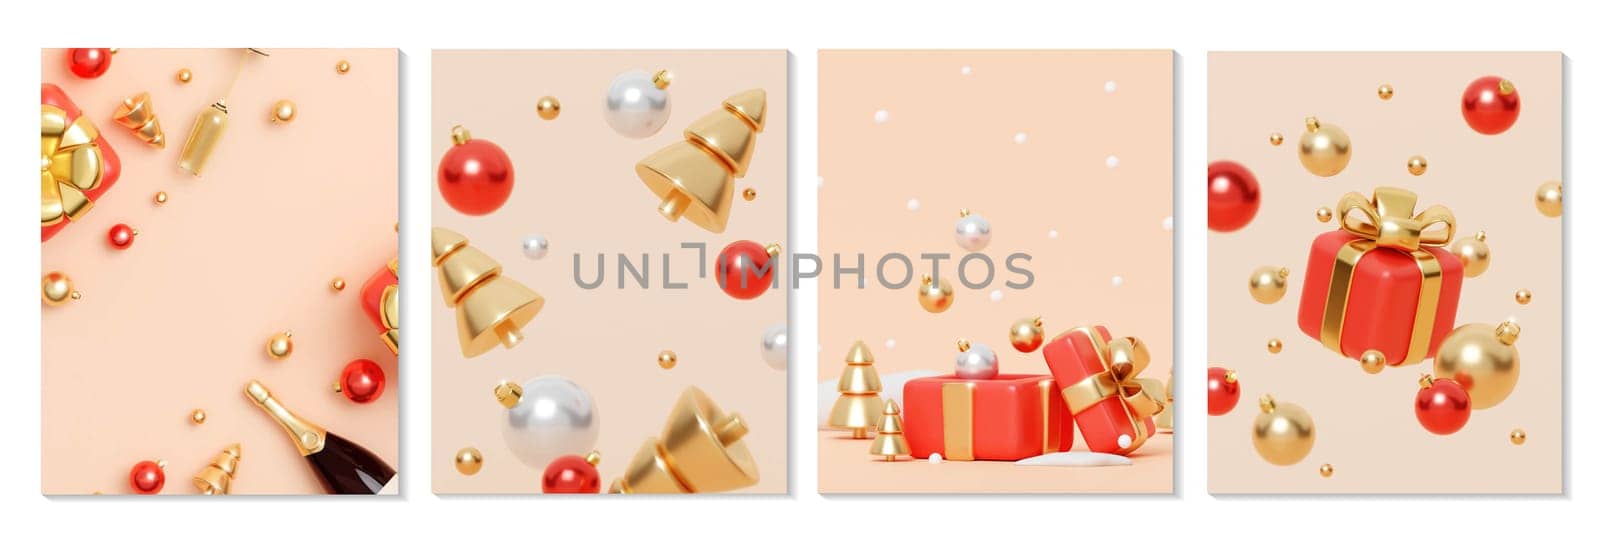 Merry Christmas and Happy New Year. Xmas Background set. Christmas poster, holiday banner layout. 3d render by meepiangraphic